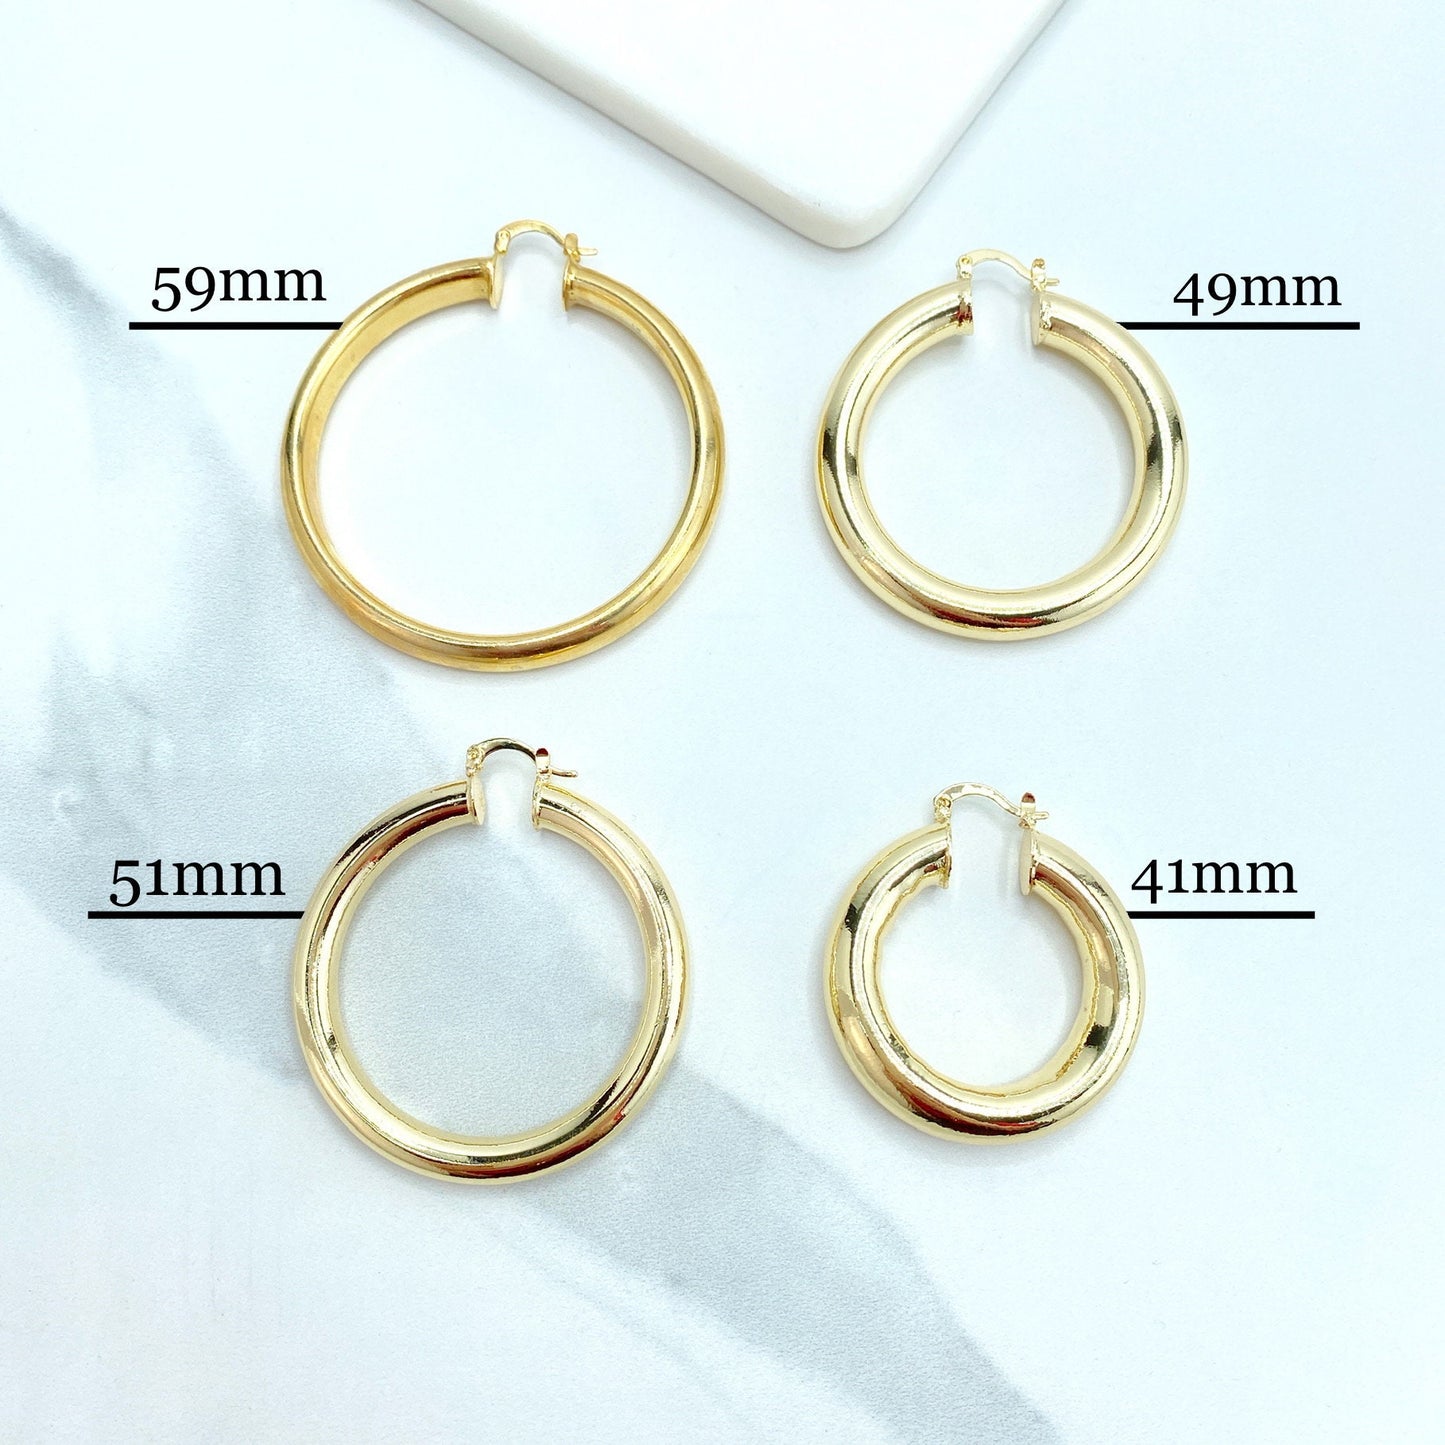 18k Gold Filled Light Tubular Hoops Earrings, Available in 41mm, 49mm, 51mm or 59mm, Wholesale Jewelry Making Supplies